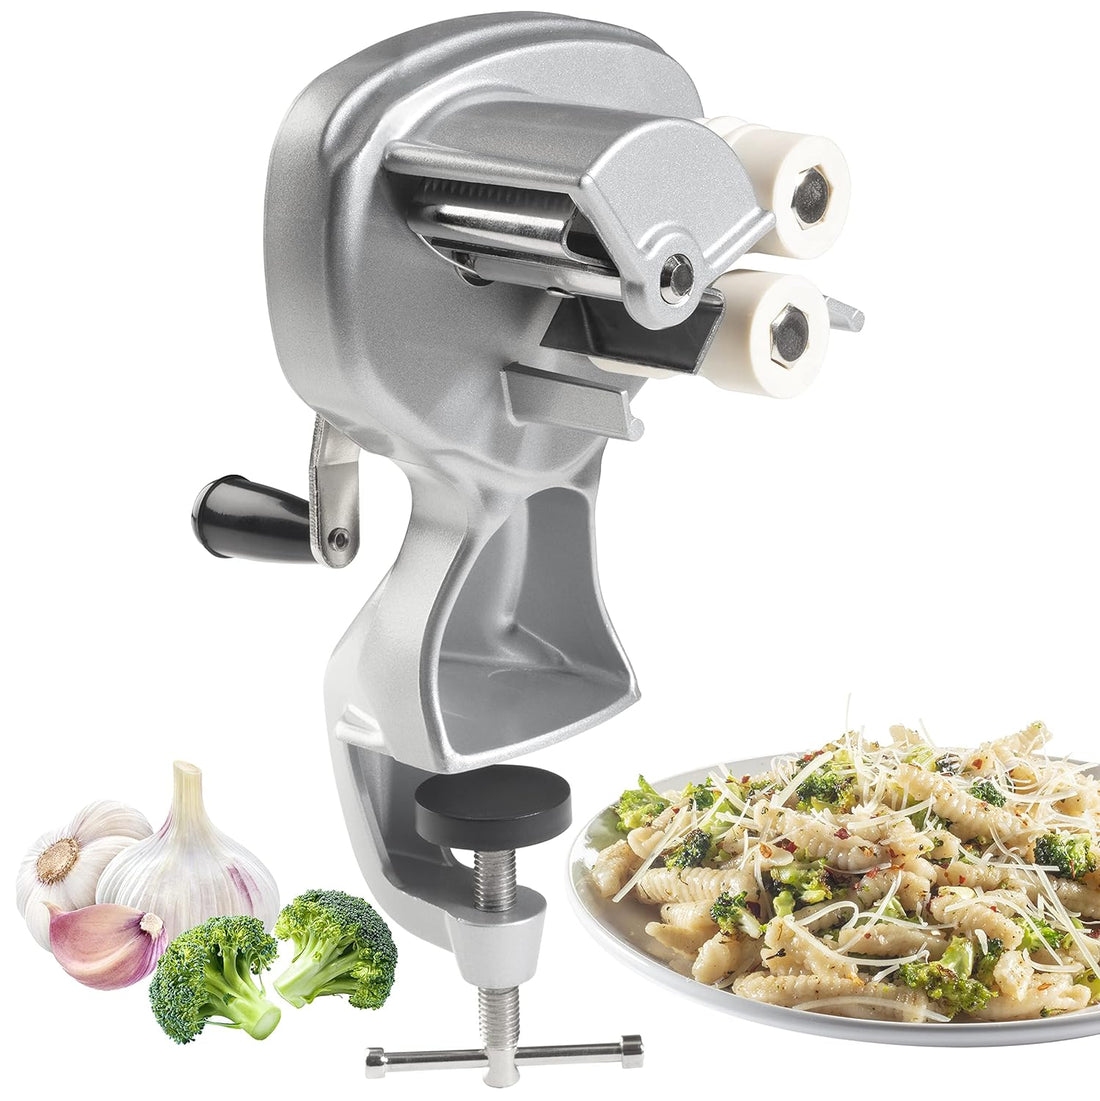 Cavatelli Maker Machine w Easy Clean Rollers- Makes Authentic Gnocchi, Pasta Seashells and More- Recipes Included